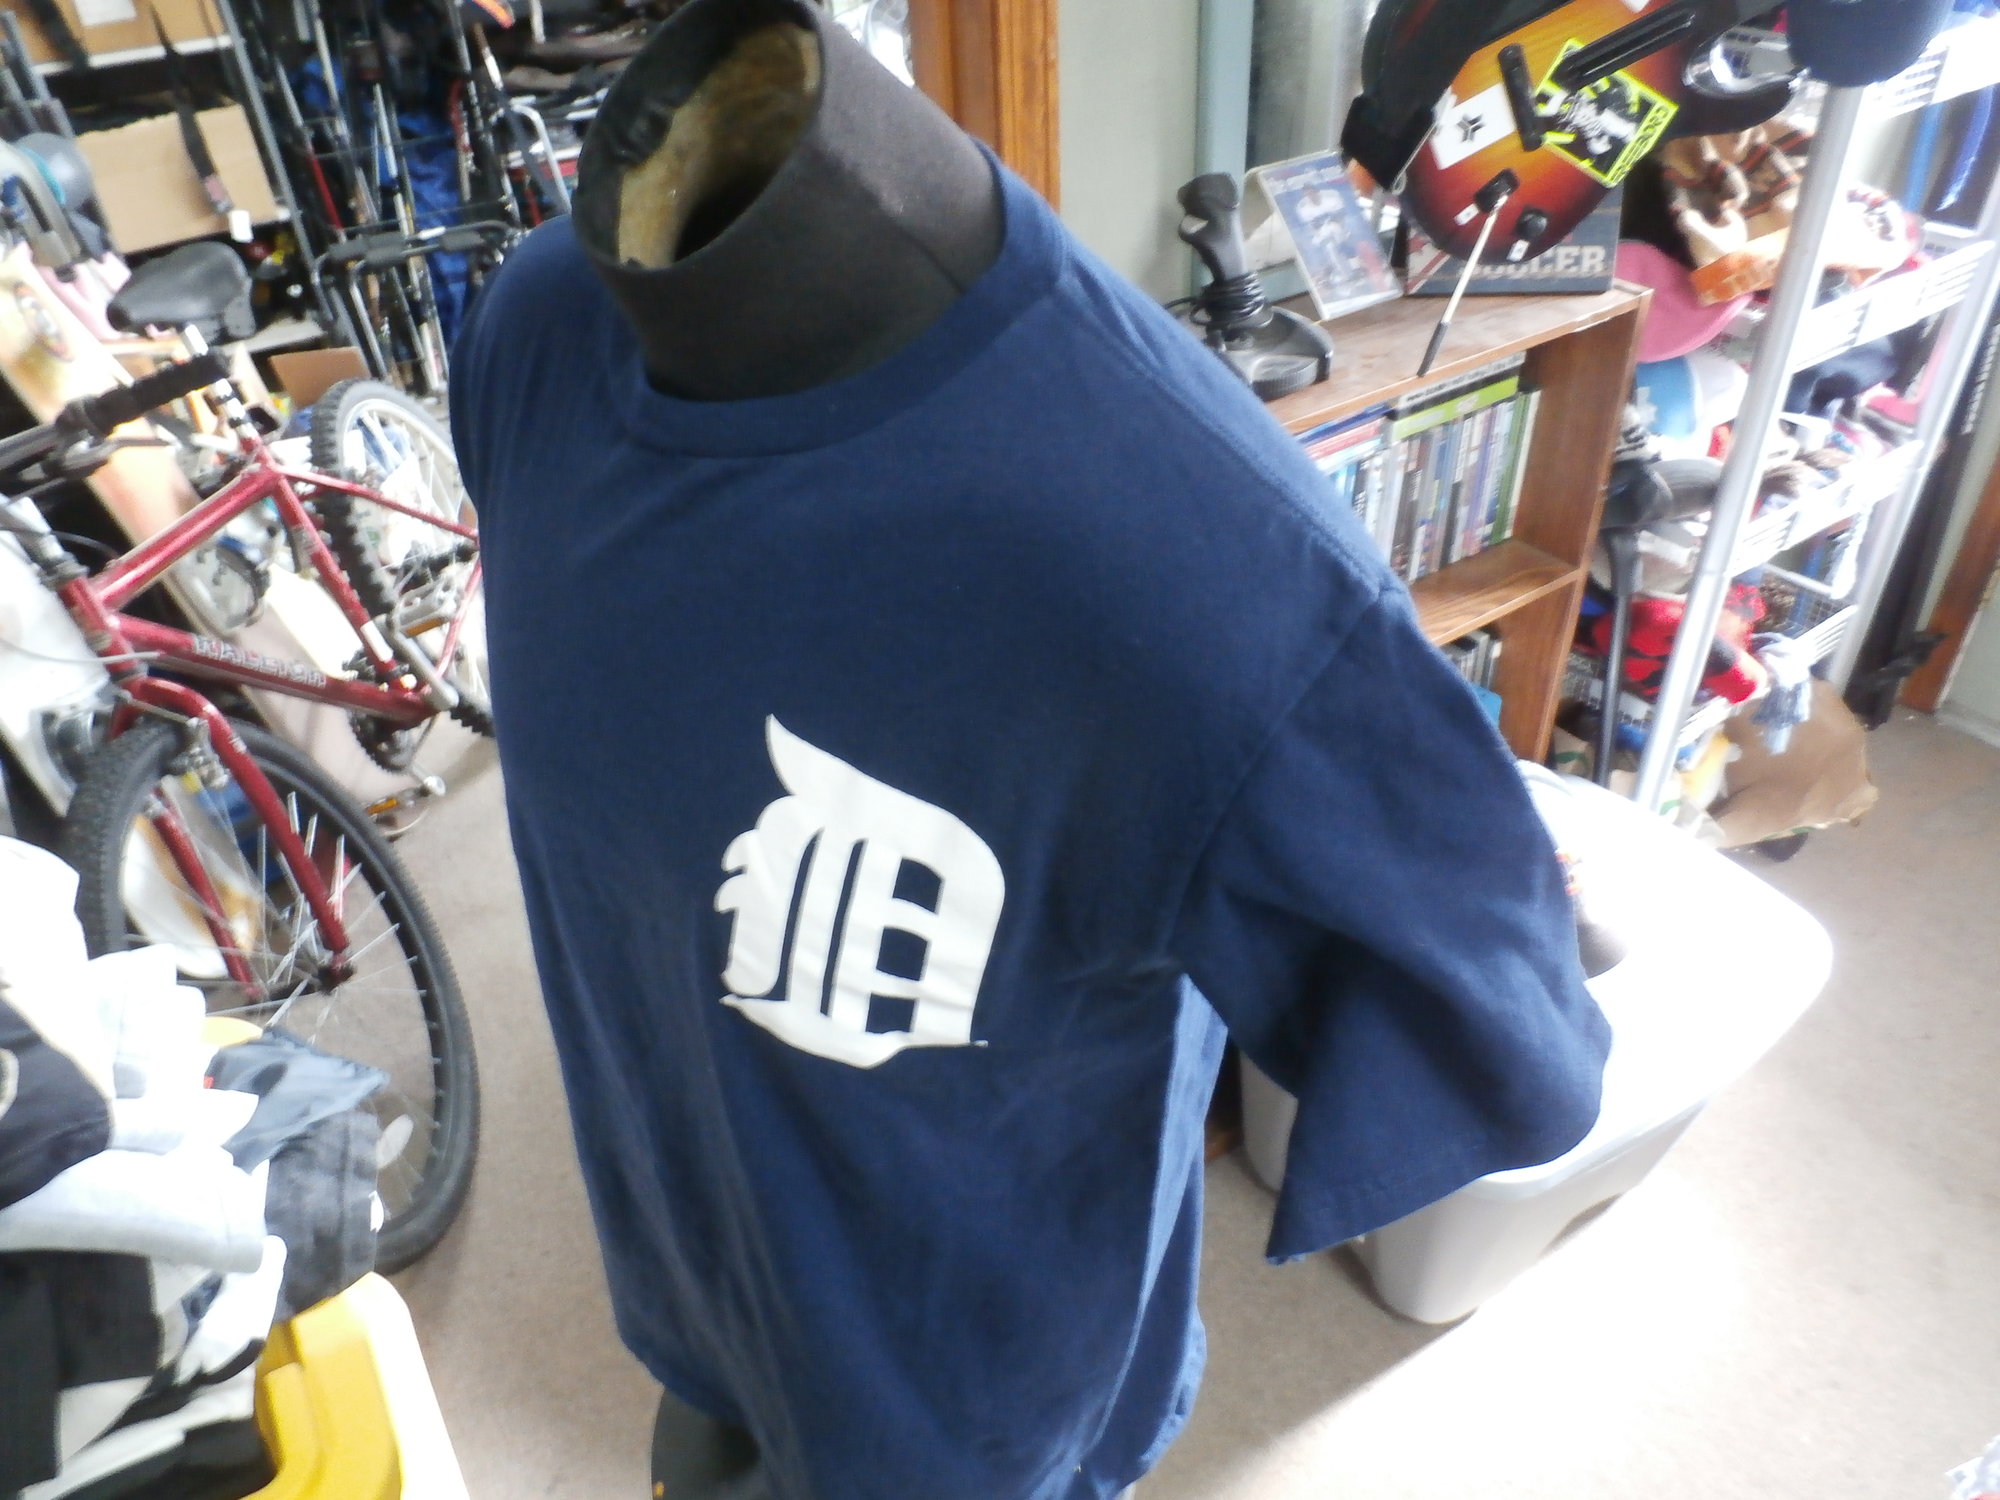 Detroit Tigers Adidas  Recycled ActiveWear ~ FREE SHIPPING USA ONLY~